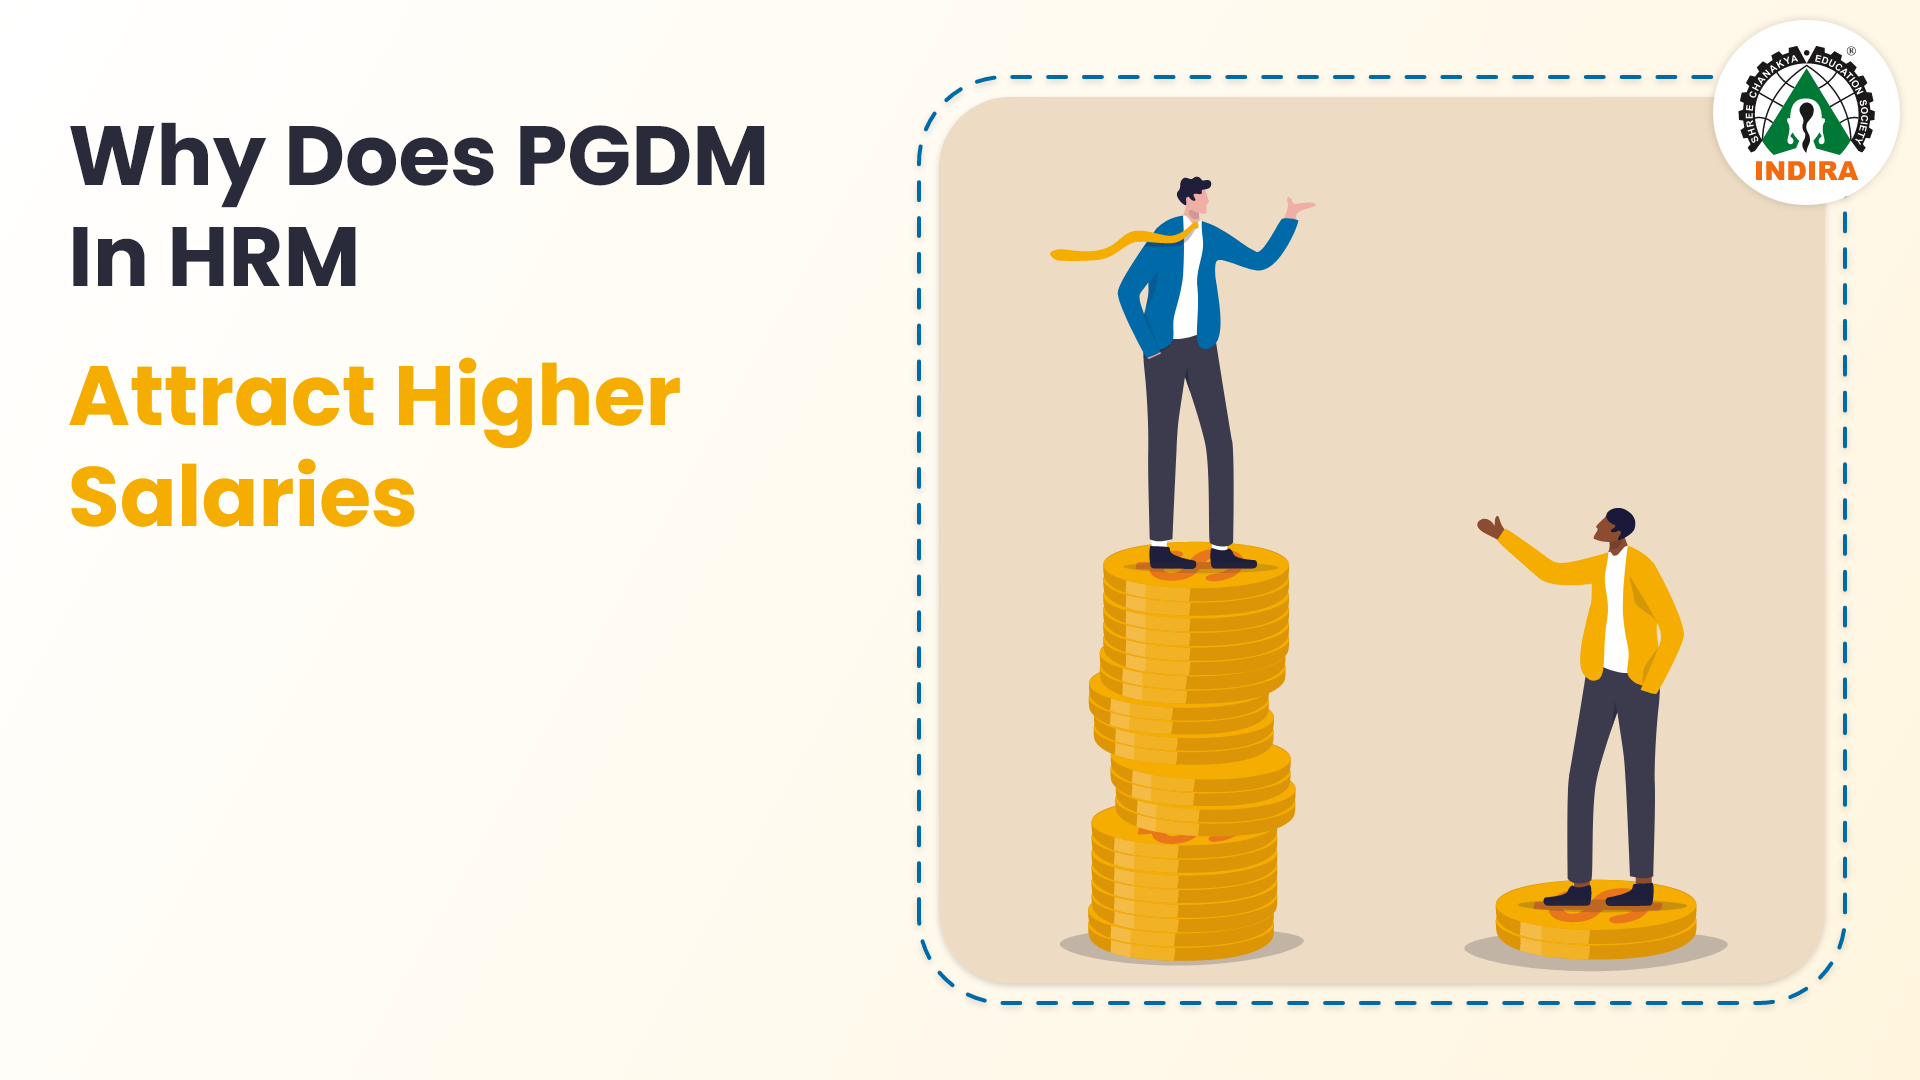 Why does PGDM in HRM attract higher salaries?